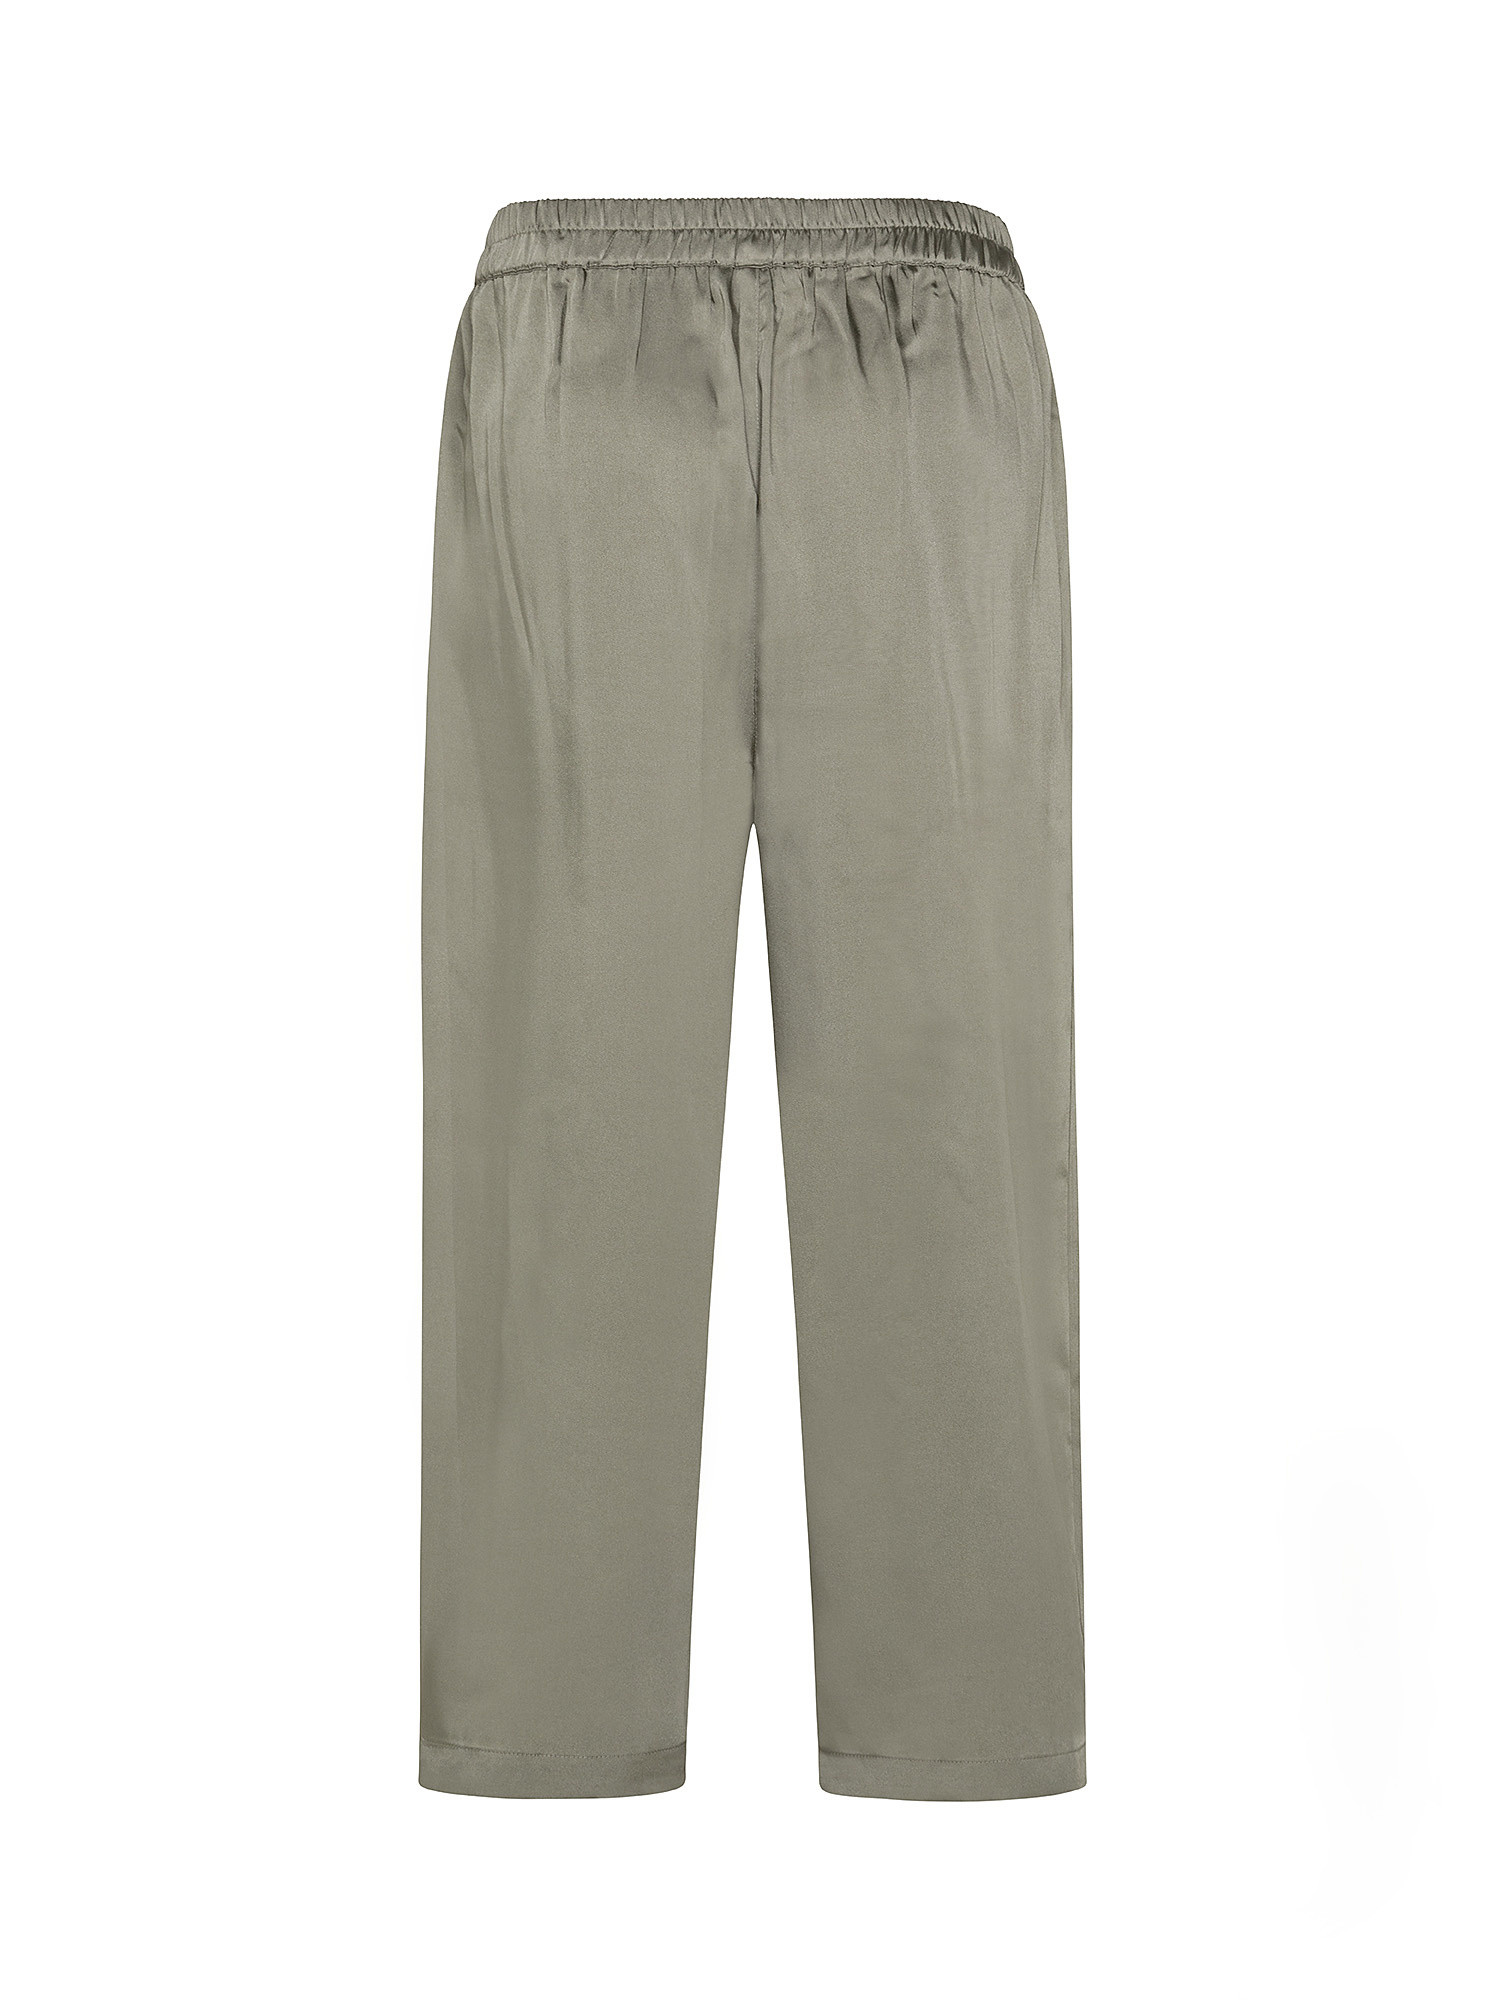 Wide leg trousers, Grey, large image number 1